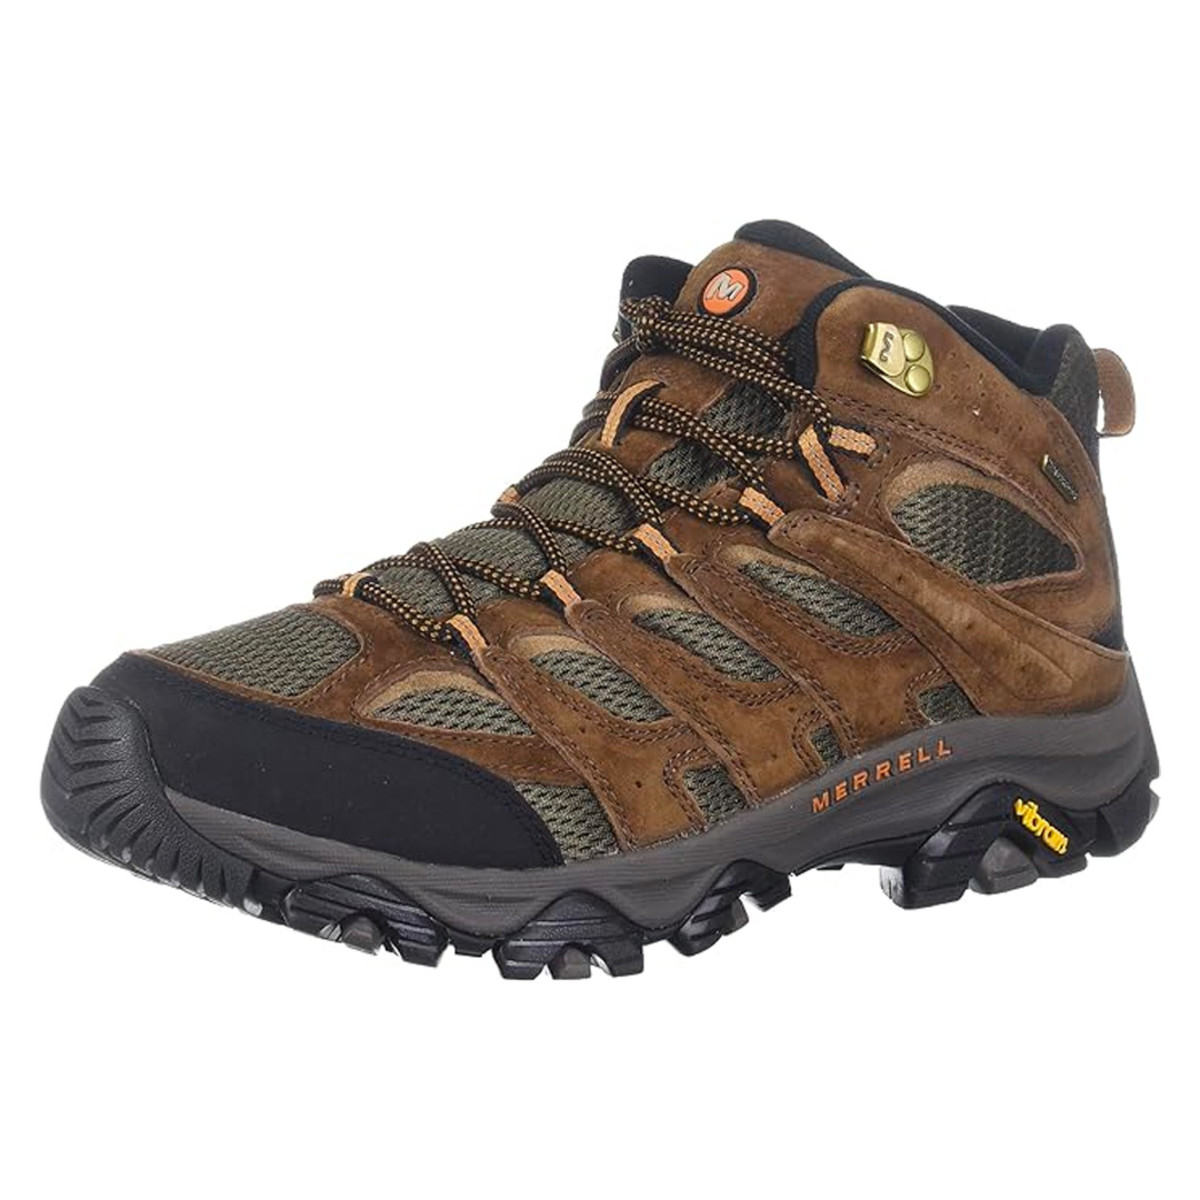 Merrell’s No. 1 Men’s Hiking Boot is Up to 50% Off at Amazon - Men's ...